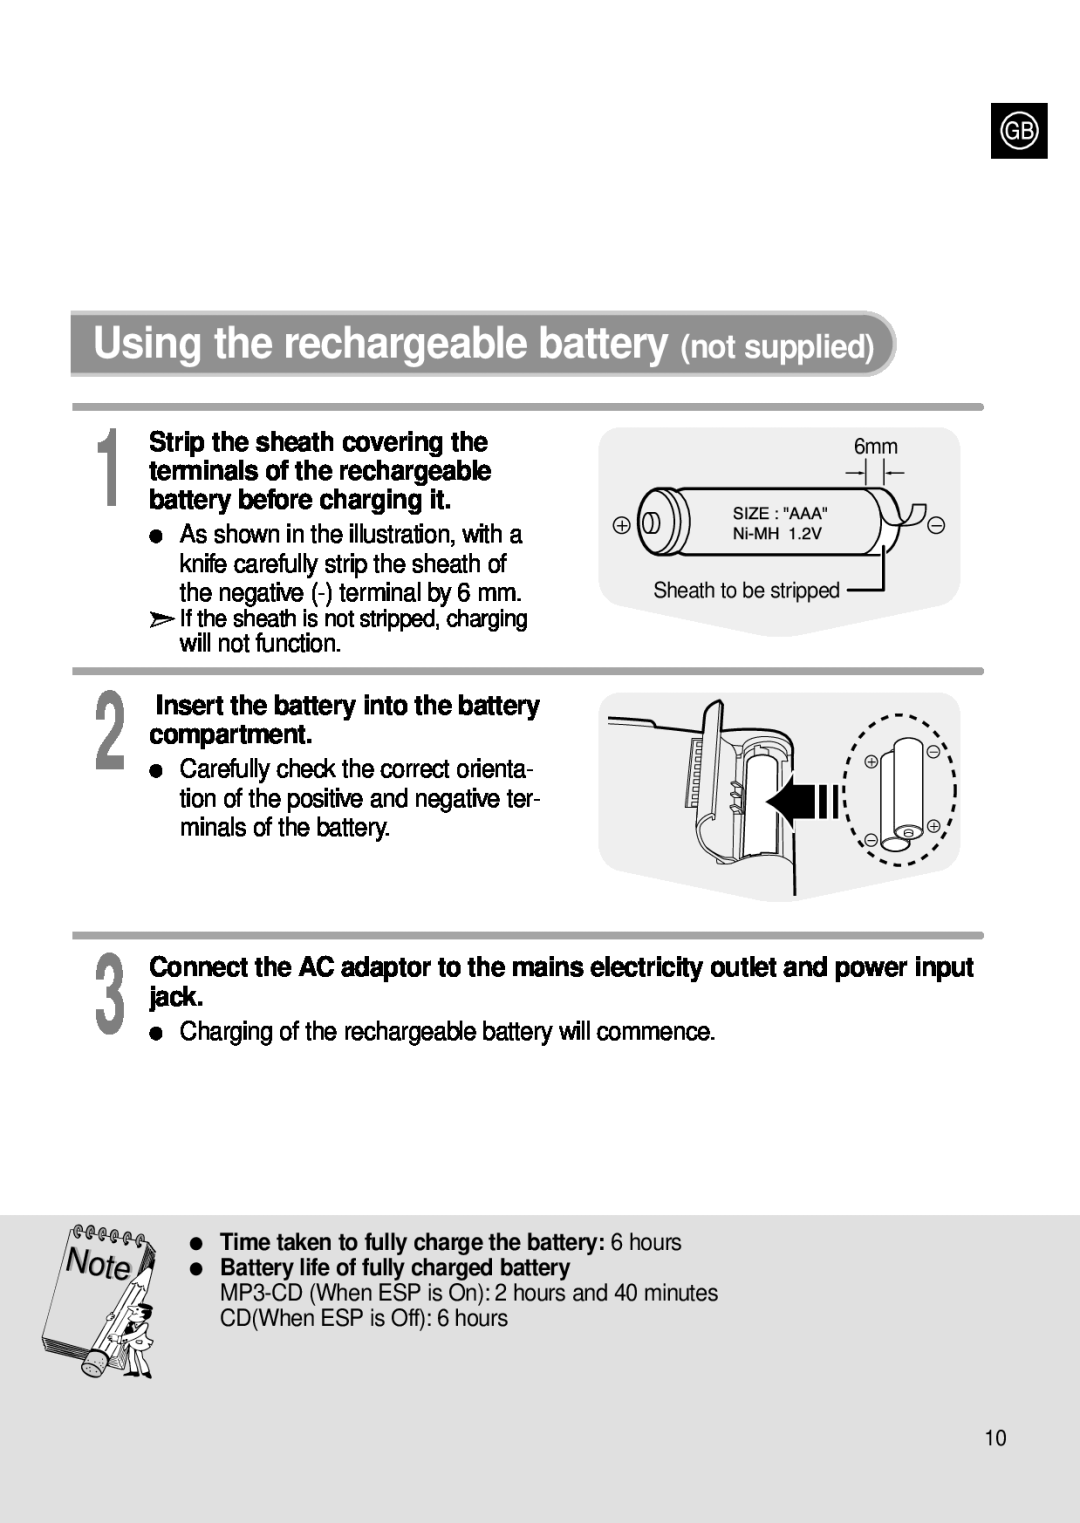 Samsung MCD-MP67 Using the rechargeable battery not supplied, Insert the battery into the battery, compartment 